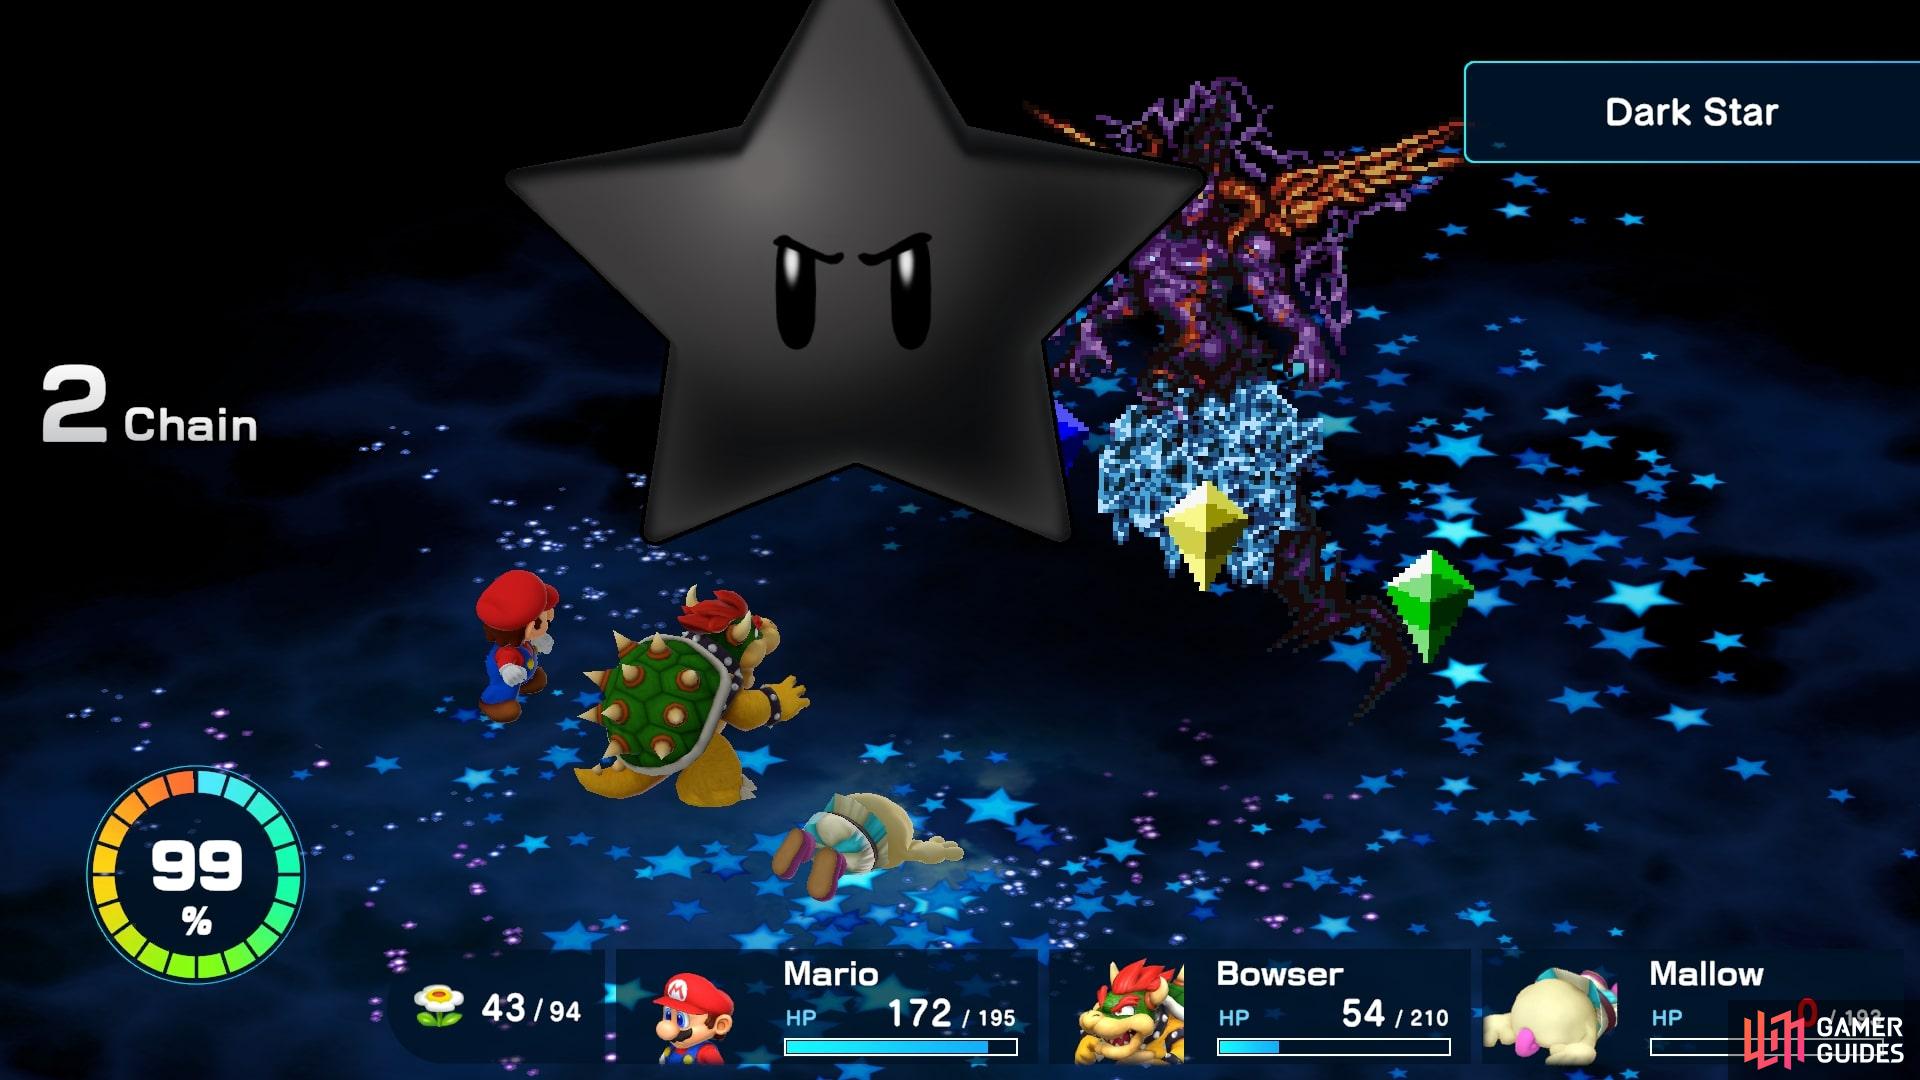 Culex will attack after the crystals have with powerful moves like Dark Star.